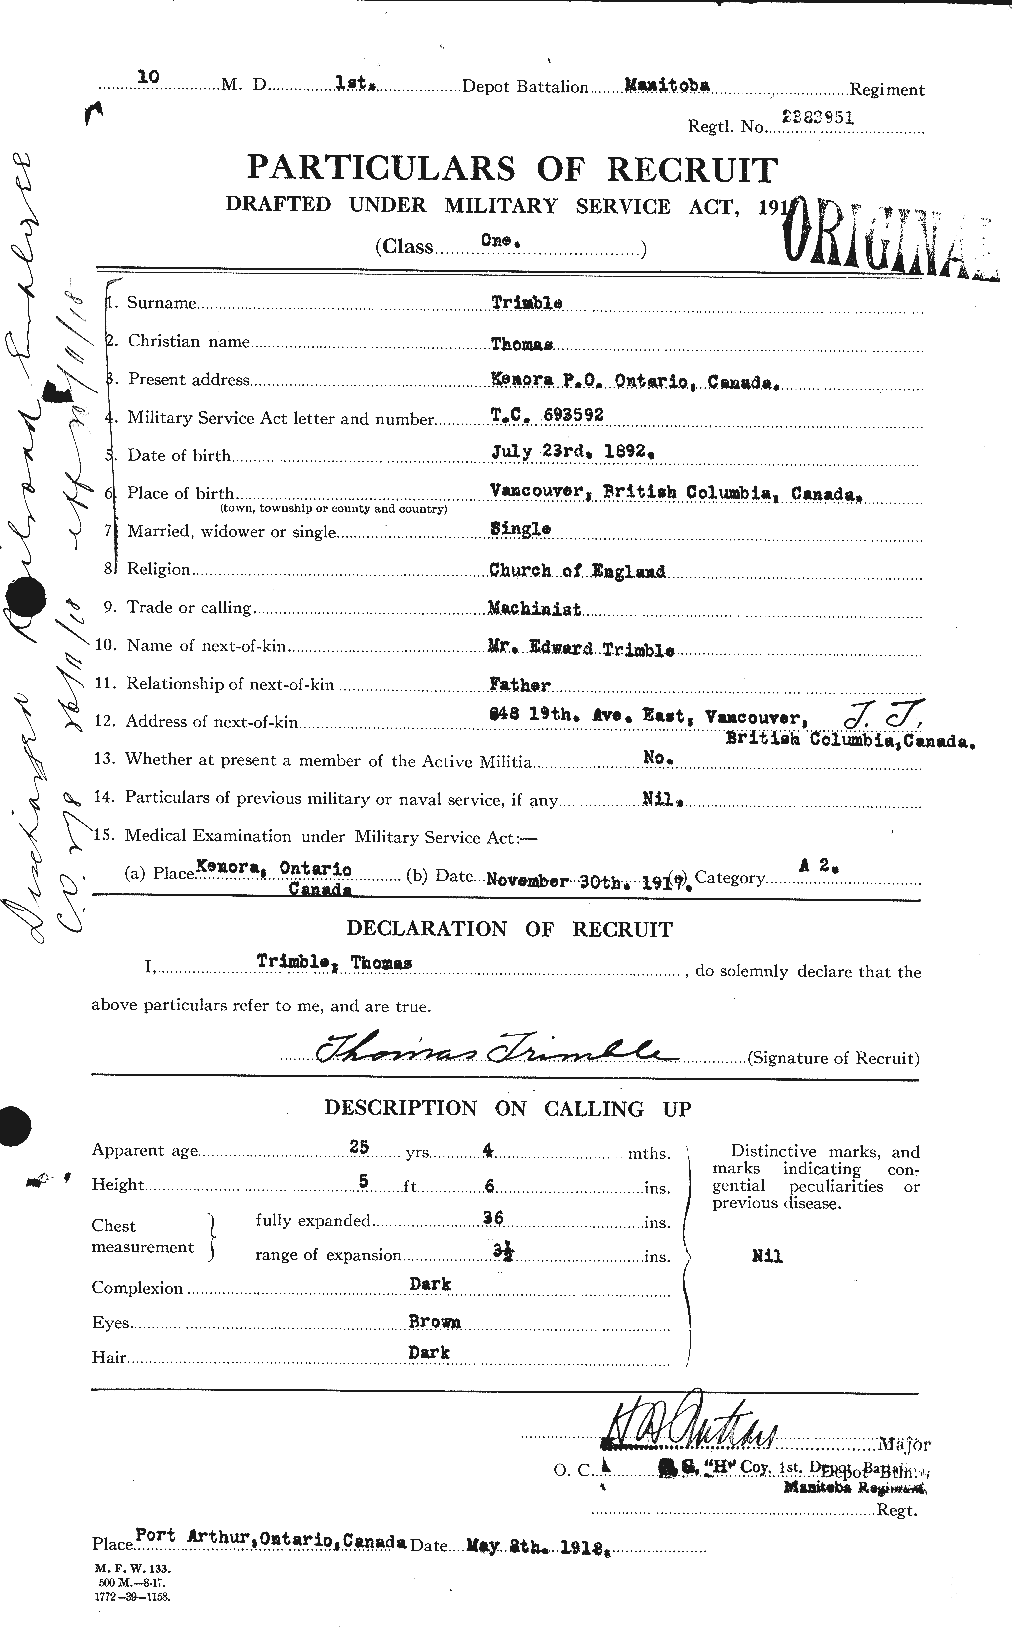 Personnel Records of the First World War - CEF 641314a